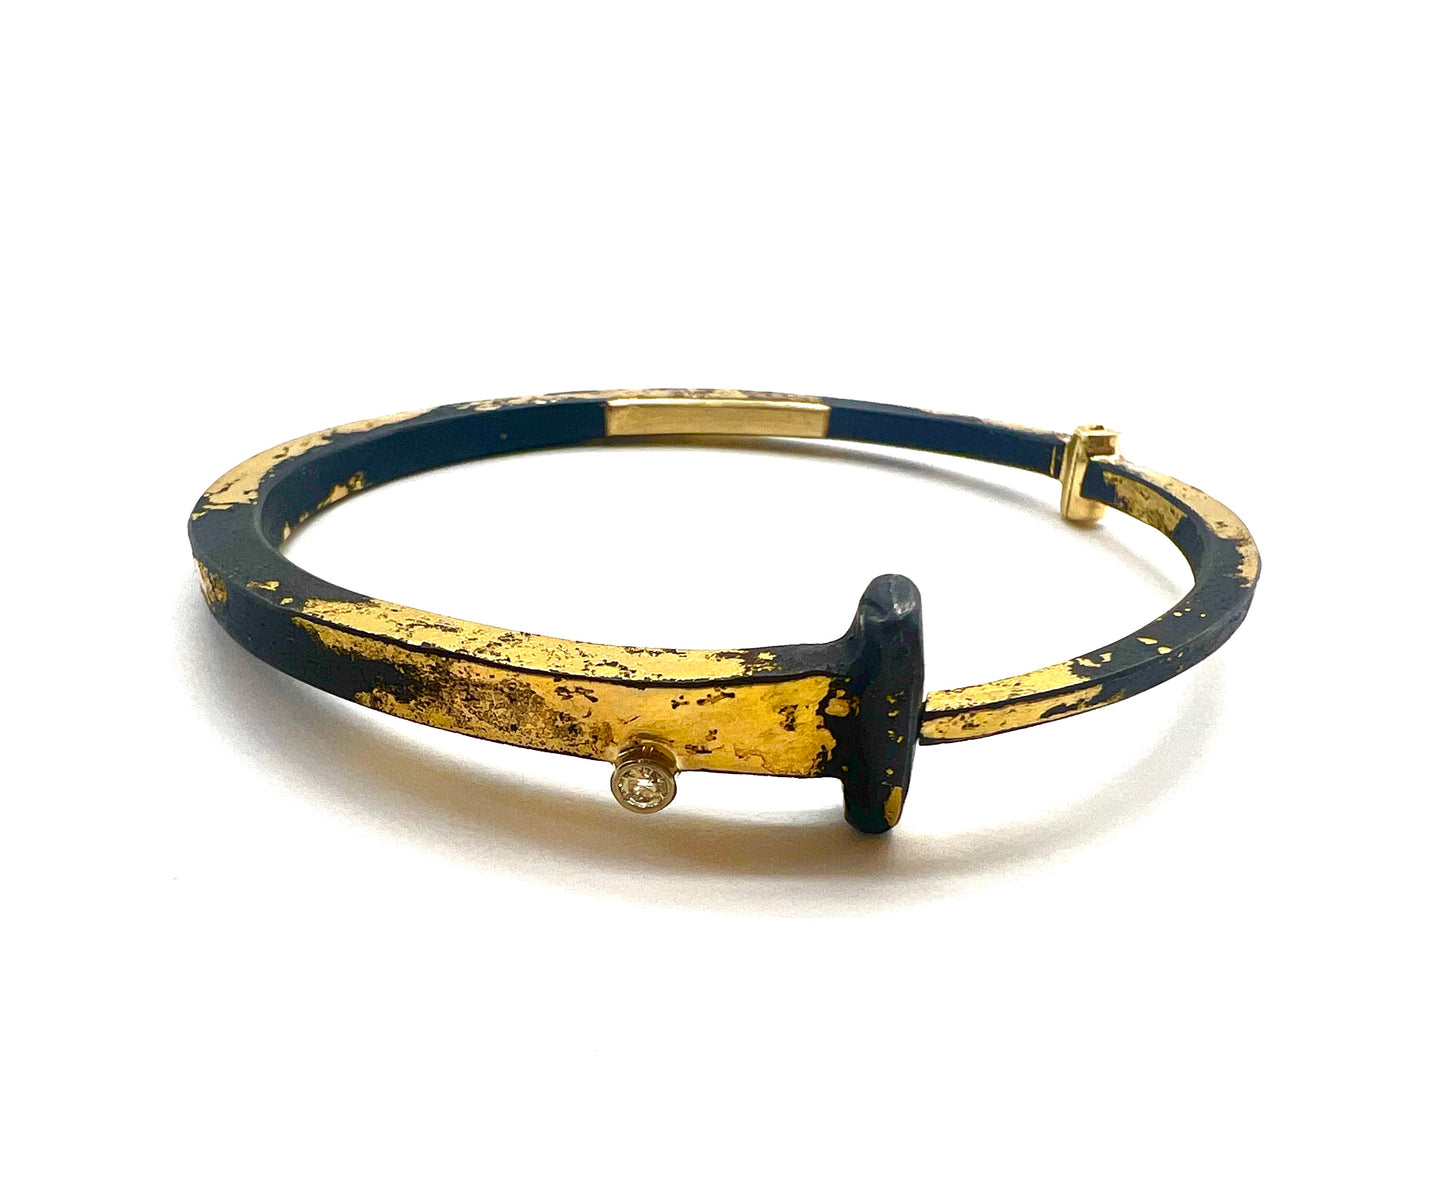 22k and 18k Gold and Iron with Single Diamond Railroad Spike Cuff